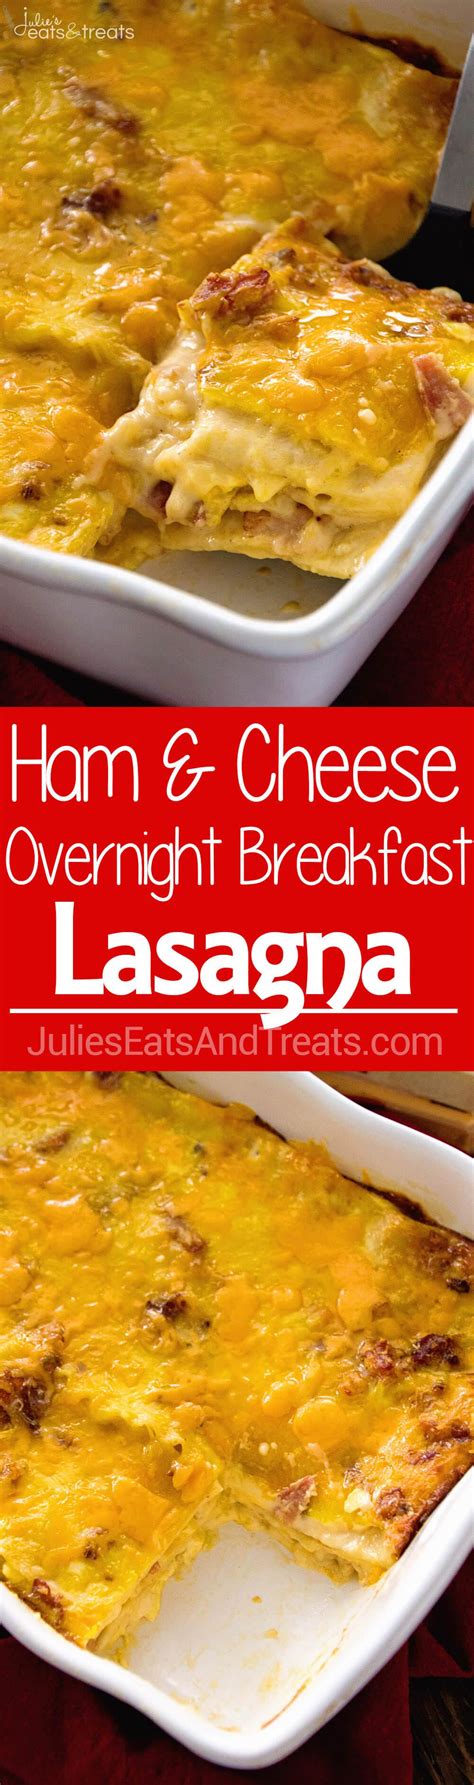 Ham & Cheese Overnight Breakfast Lasagna Recipe ~ Layers of Lasagna Noodles Stuffed with a ...